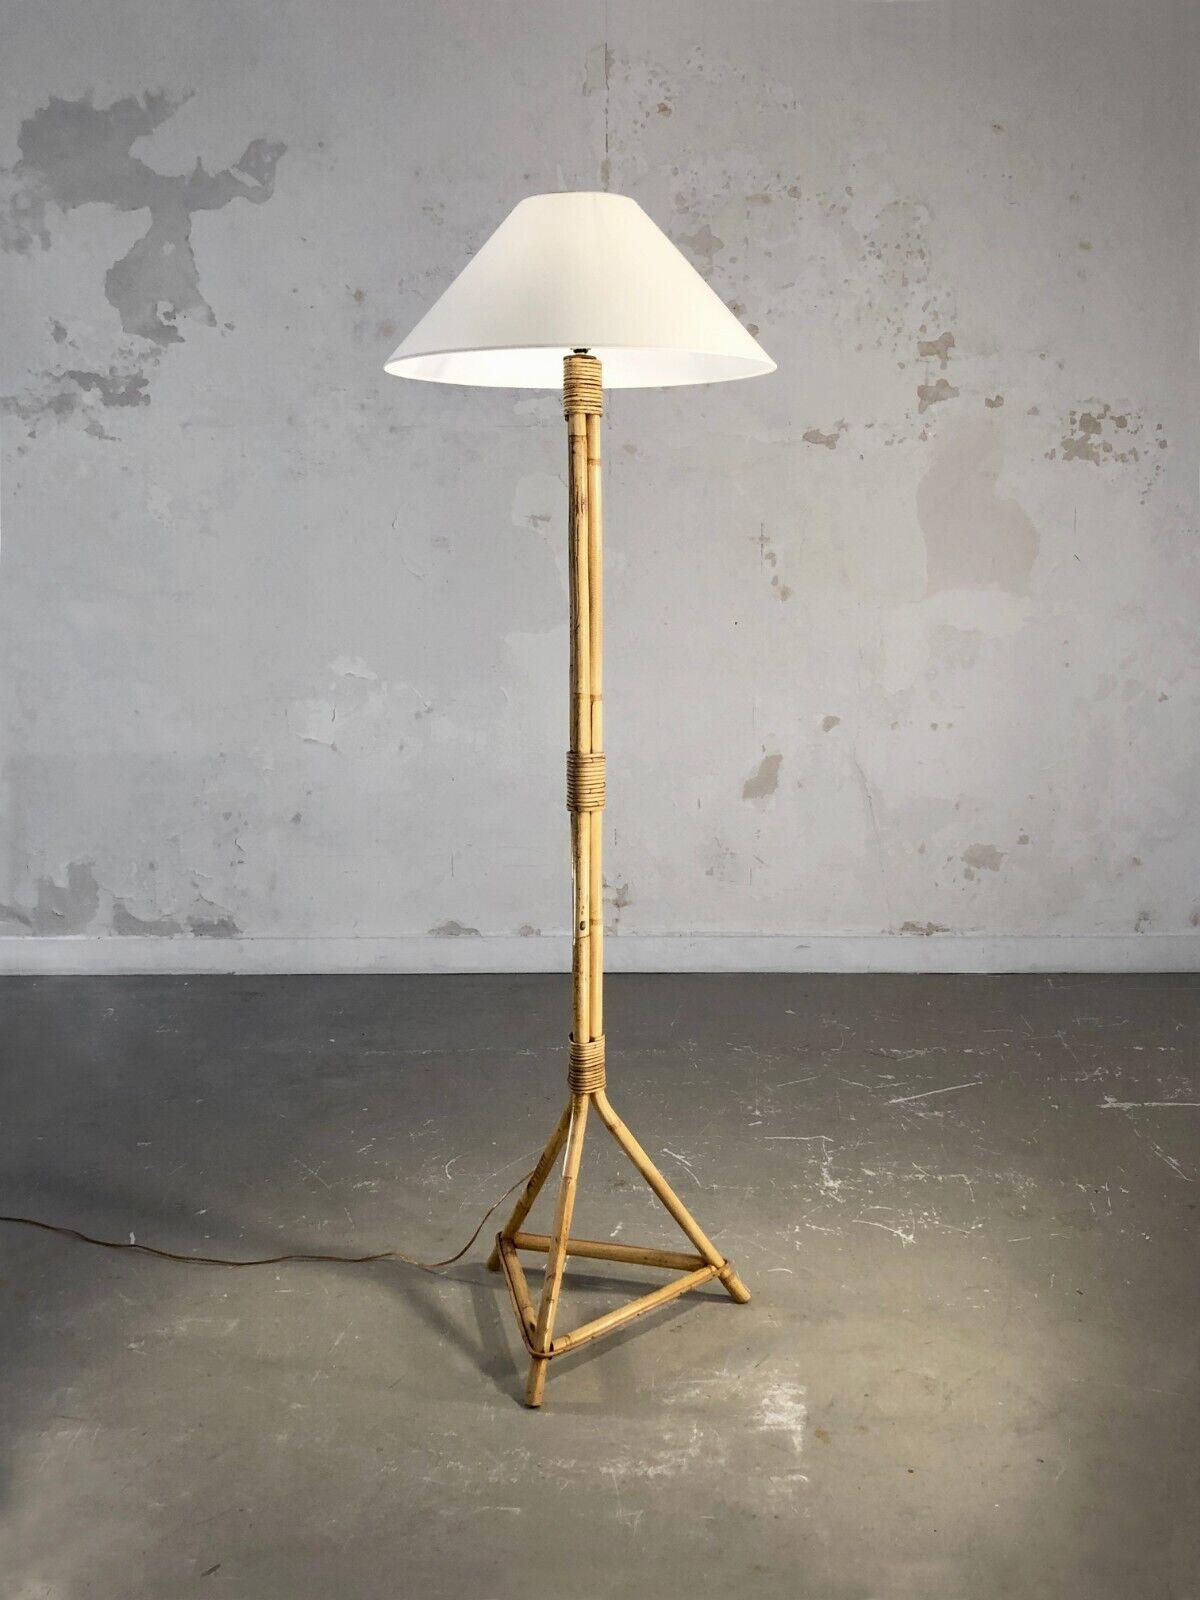 A very simple, minimal and rigorous tripod floor lamp, Modernist, Rustic-Modern, Art-Popular, Brutalist, pyramidal structure base in bamboo, vertical axis in 3 knotted bamboo tubes, supporting a beautiful traditional off-white lampshade, to be